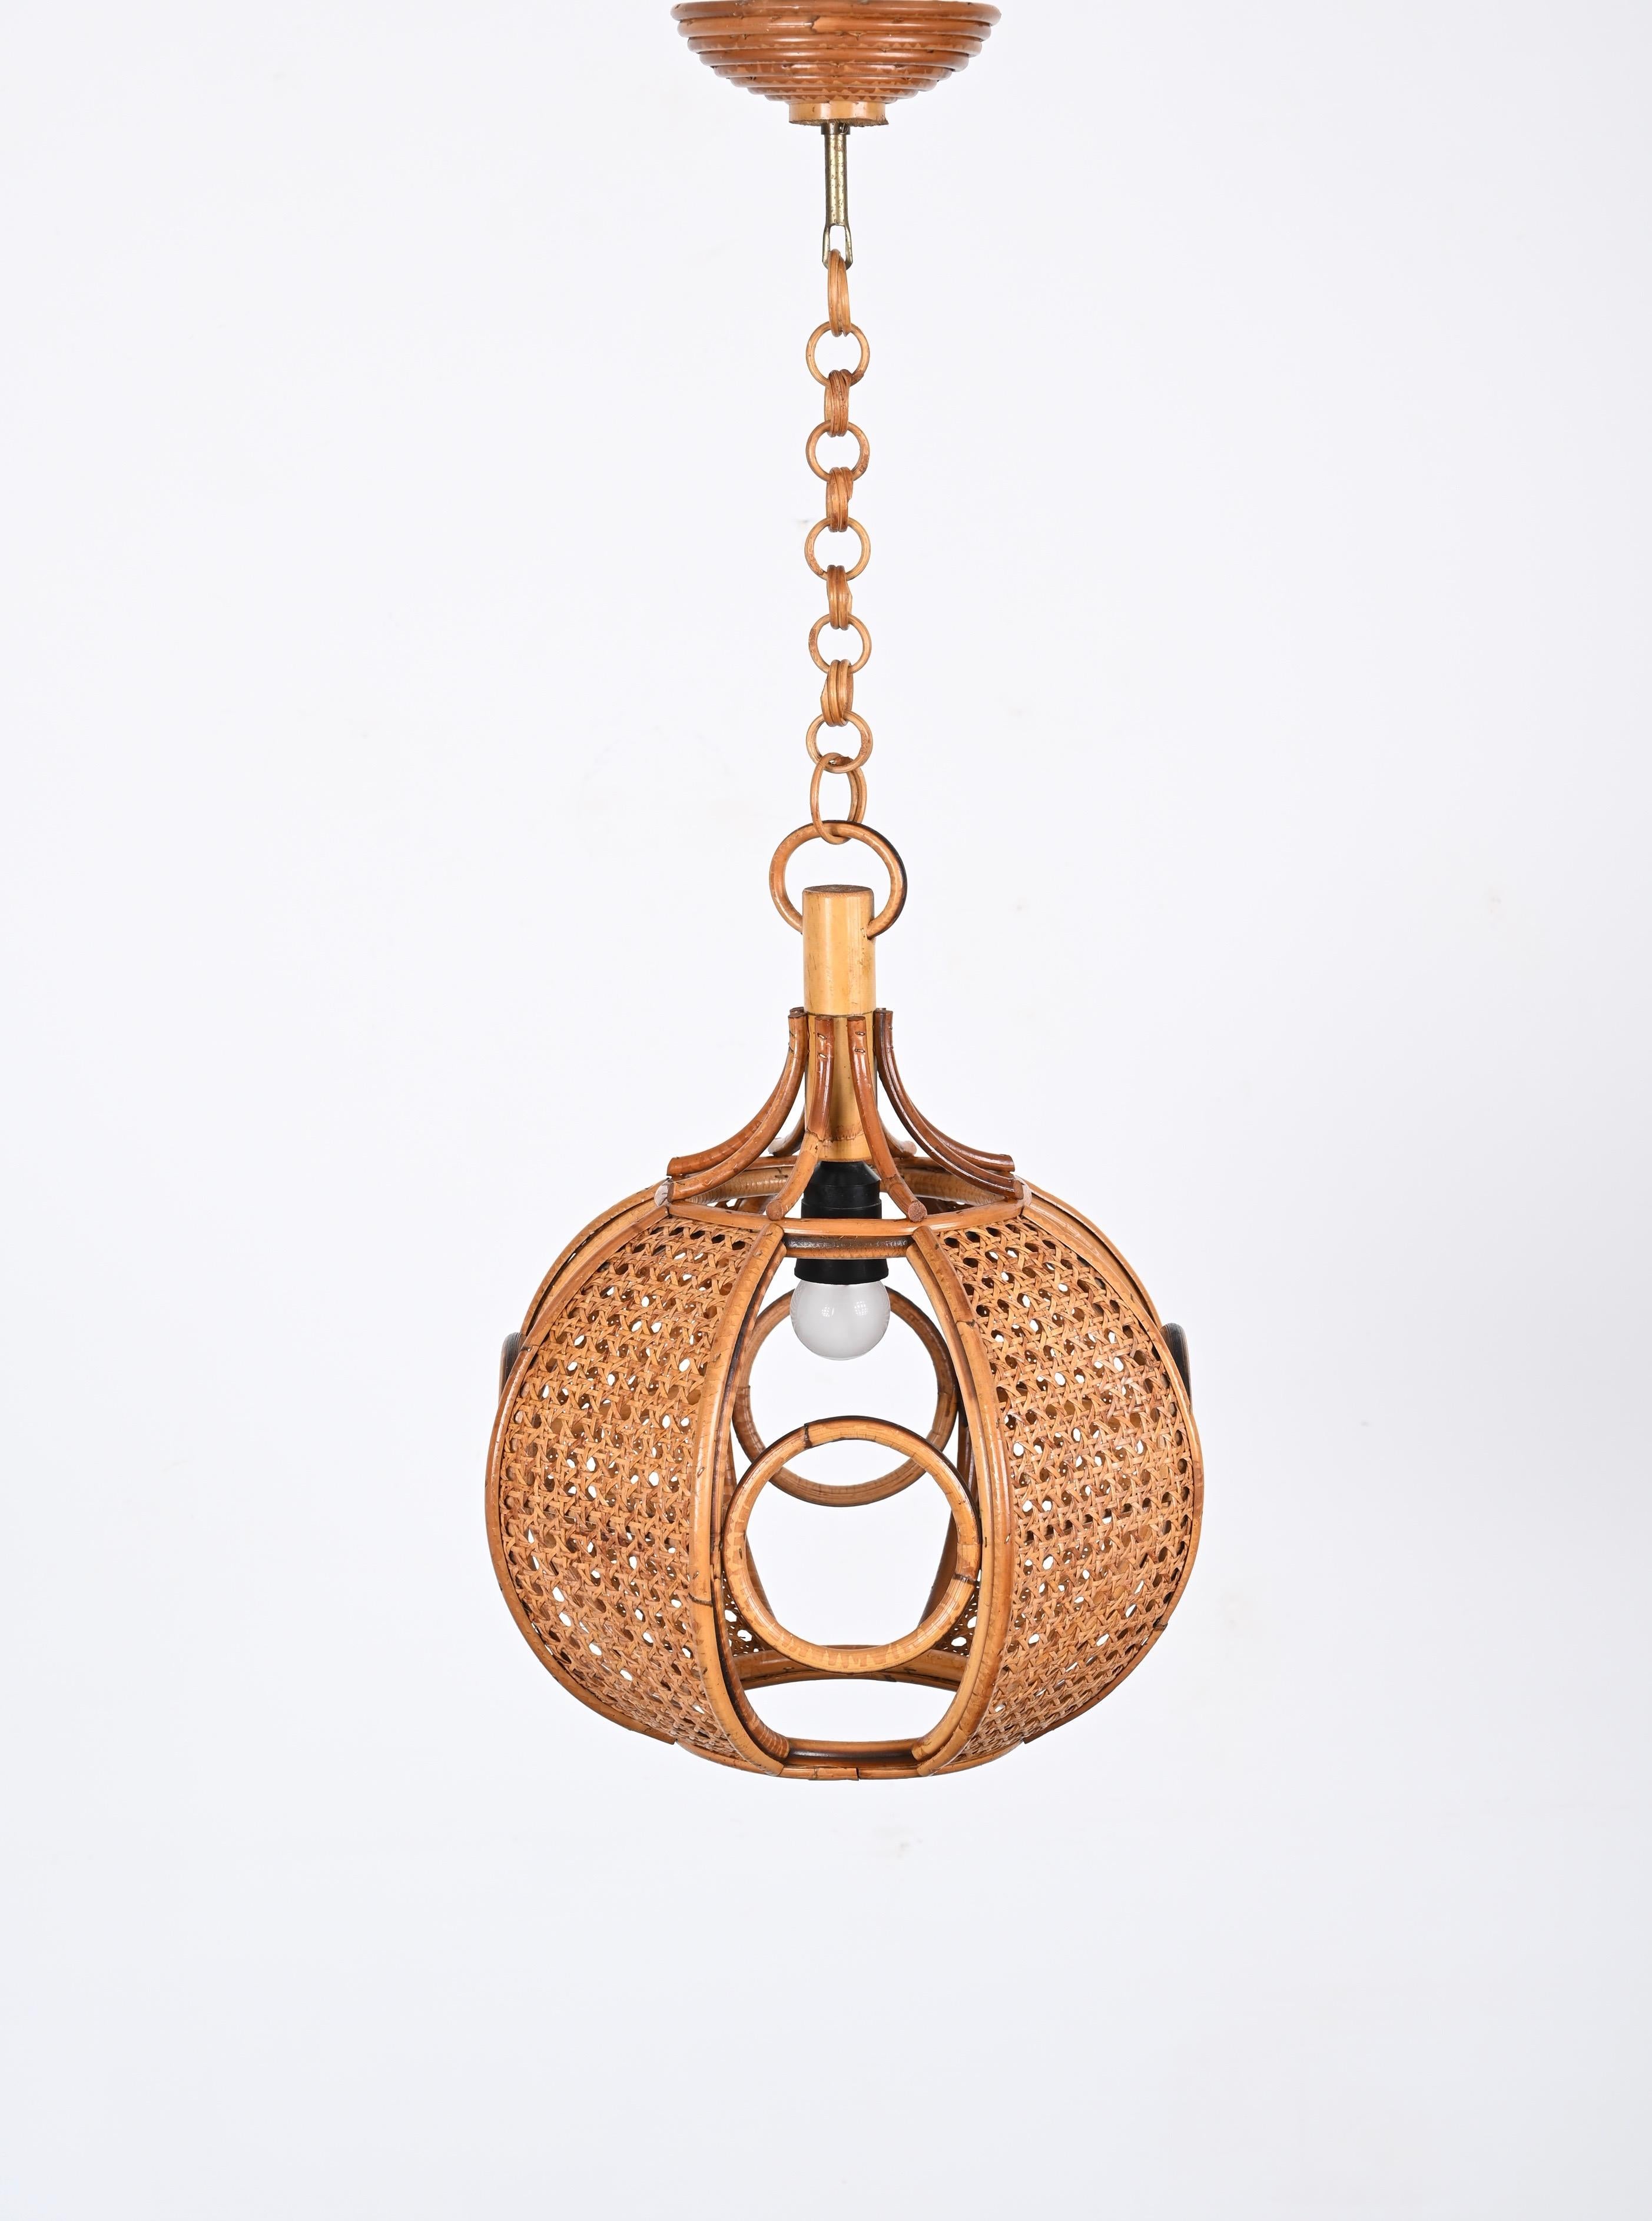 Midcentury French Riviera Chapel Rattan and Wicker Italian Chandelier, 1960s For Sale 2